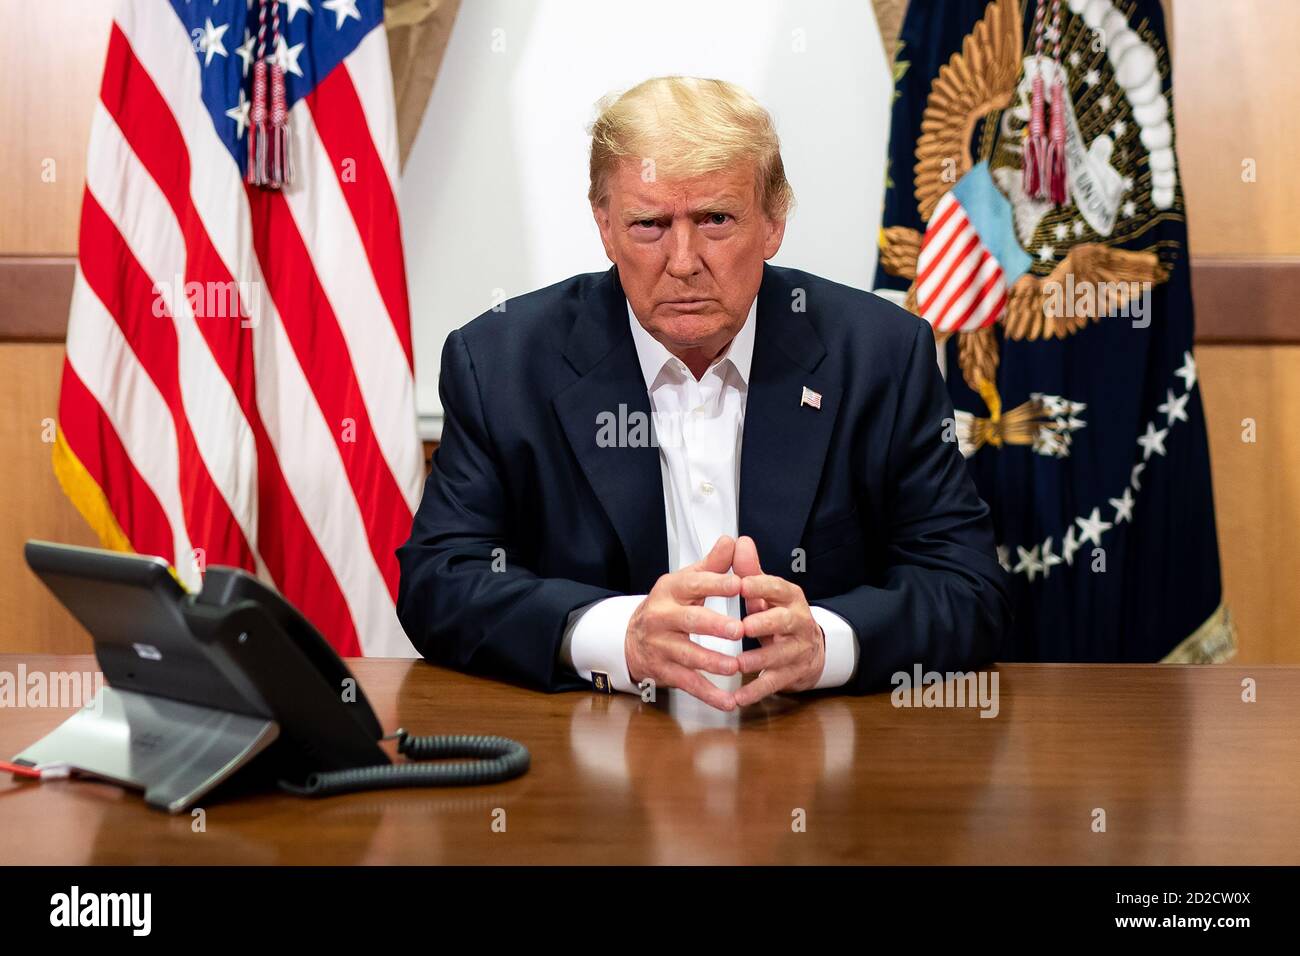 President Donald J. Trump on a conference call with Vice President Mike Pence and others from Walter Reed National Military Medical Center, where the President was being treated for COVID-19, on October 4, 2020. (USA) Stock Photo